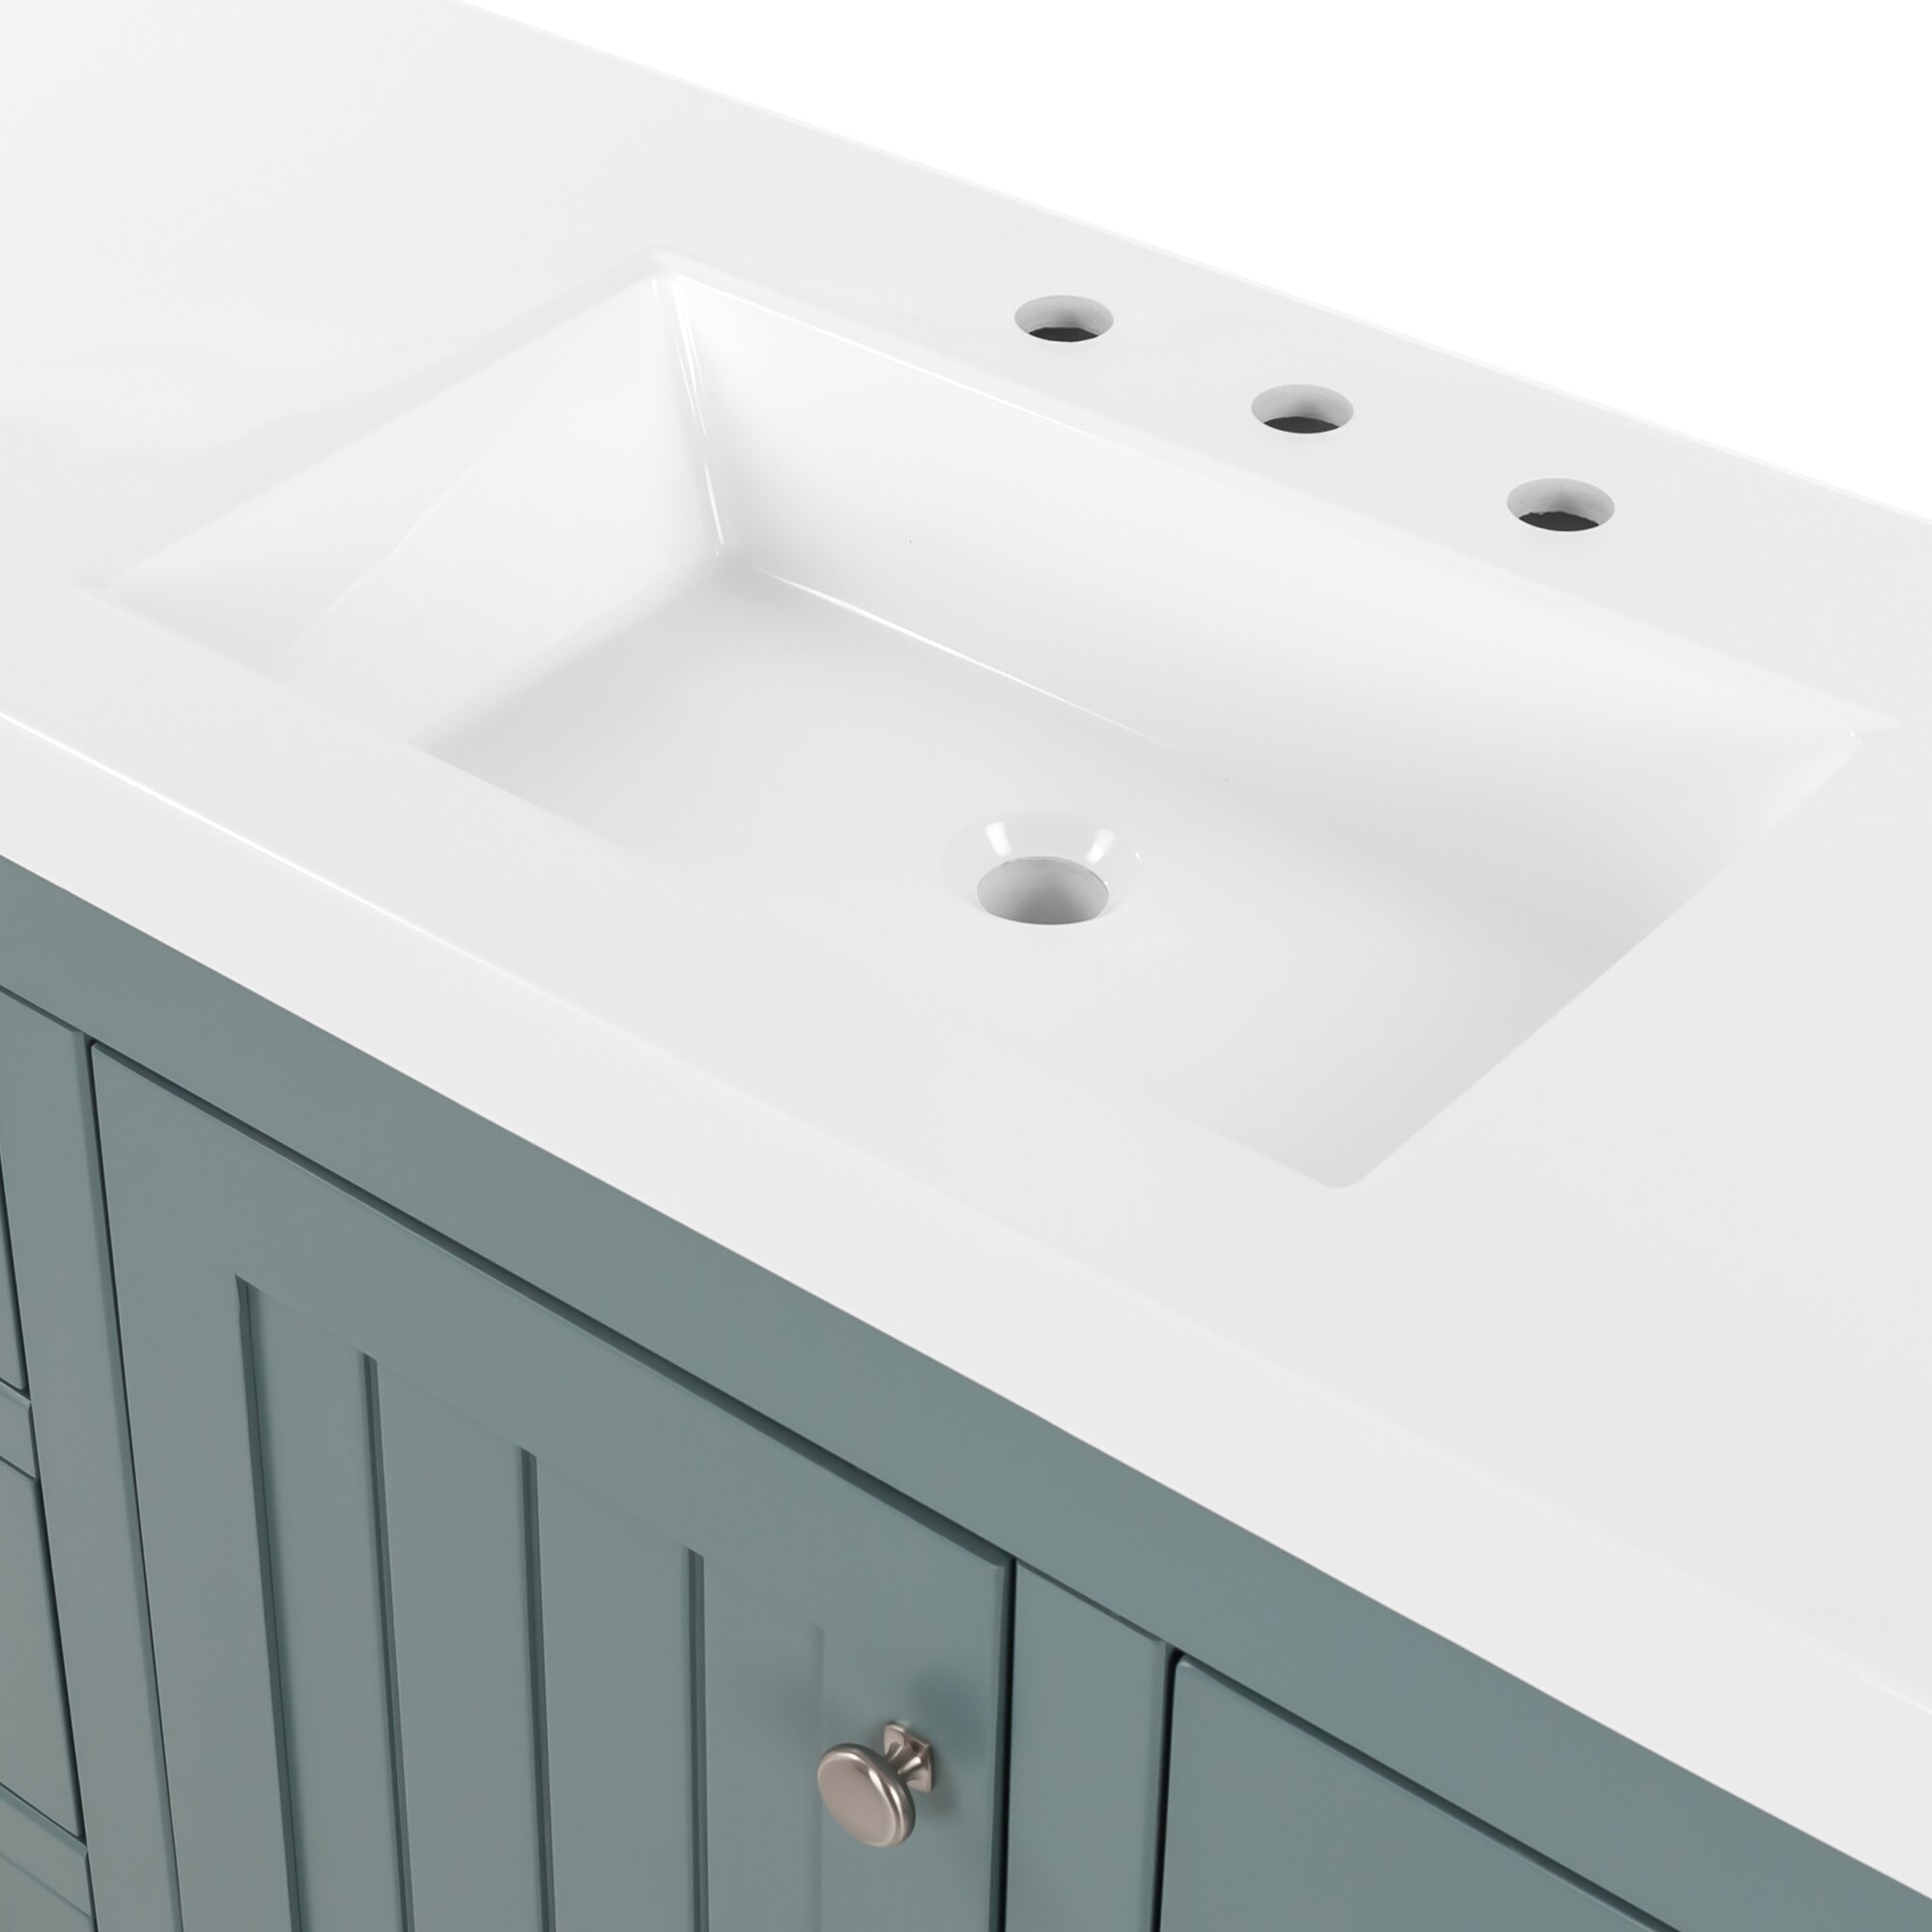 Diamond Now Tipton 48 In Sage Single Sink Bathroom Vanity With White Cultured Marble Top At 